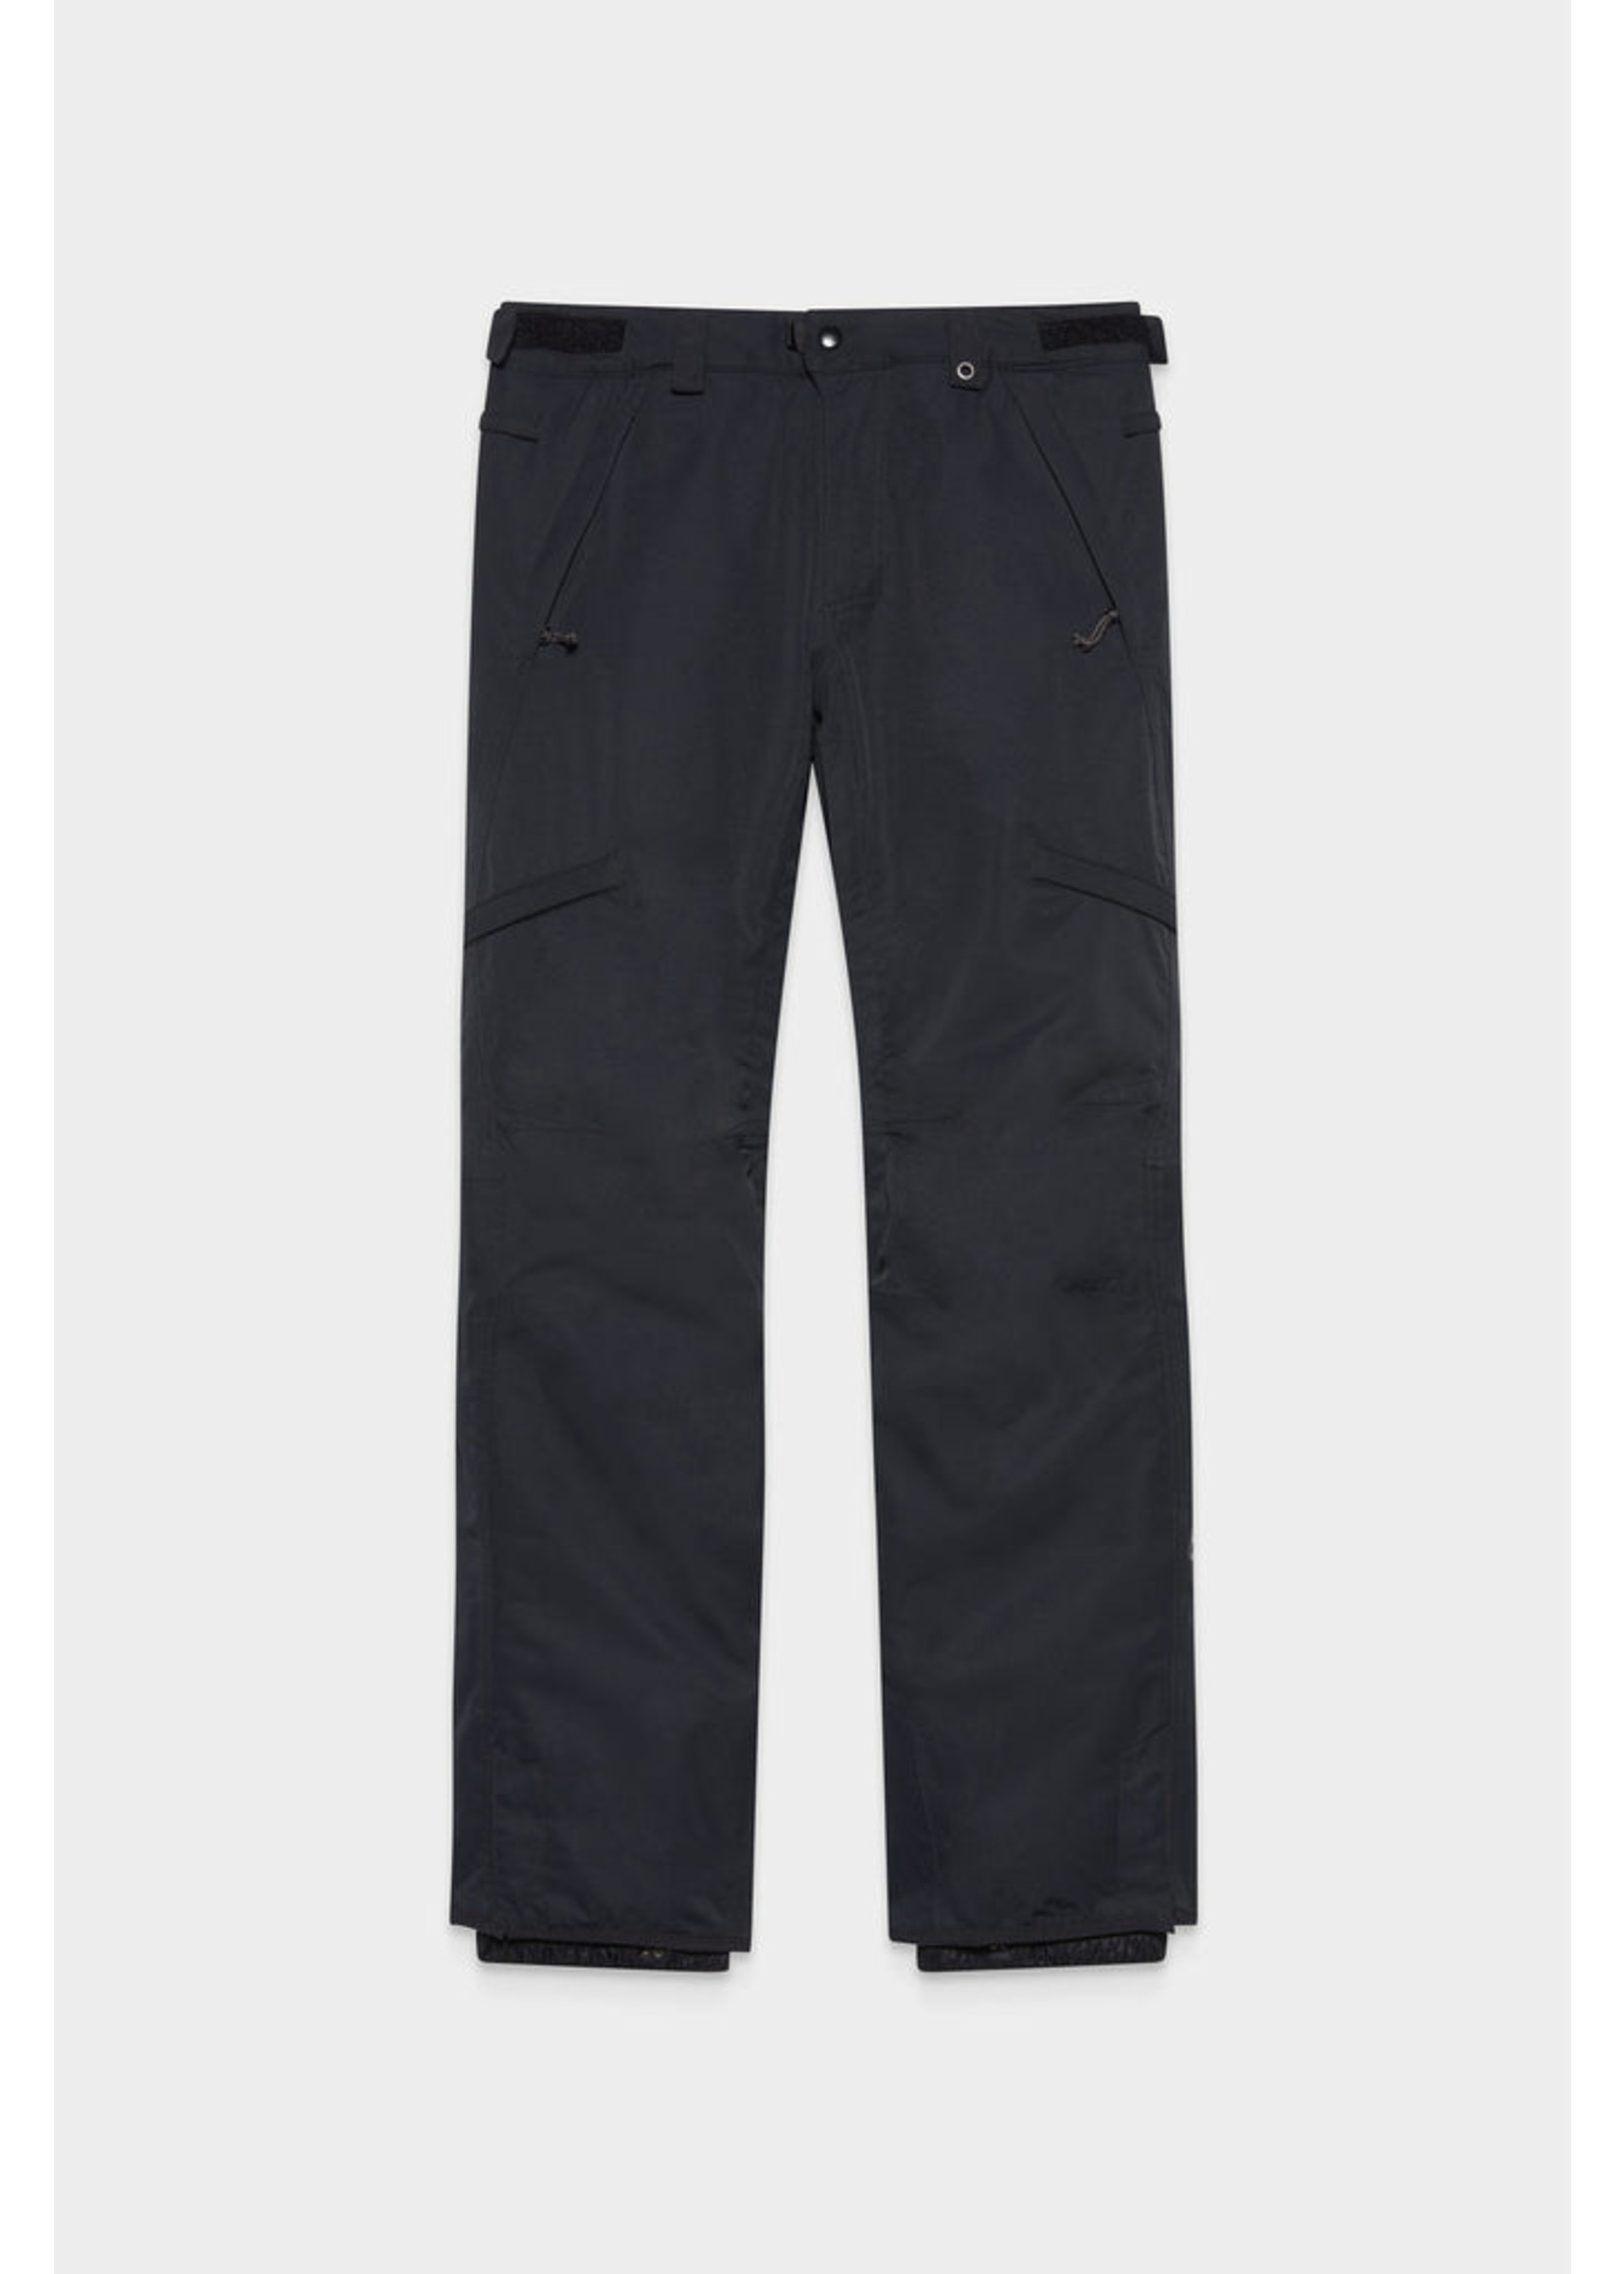 686 WMNS SMARTY 3-IN-1 CARGO PANT W22